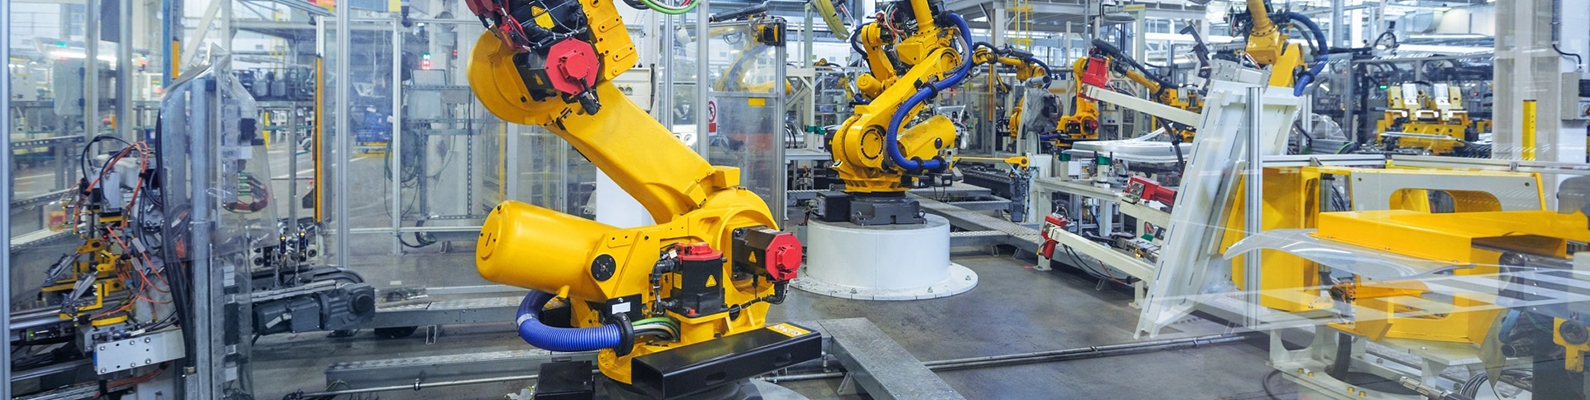 robotics, Industry, specialized machinery